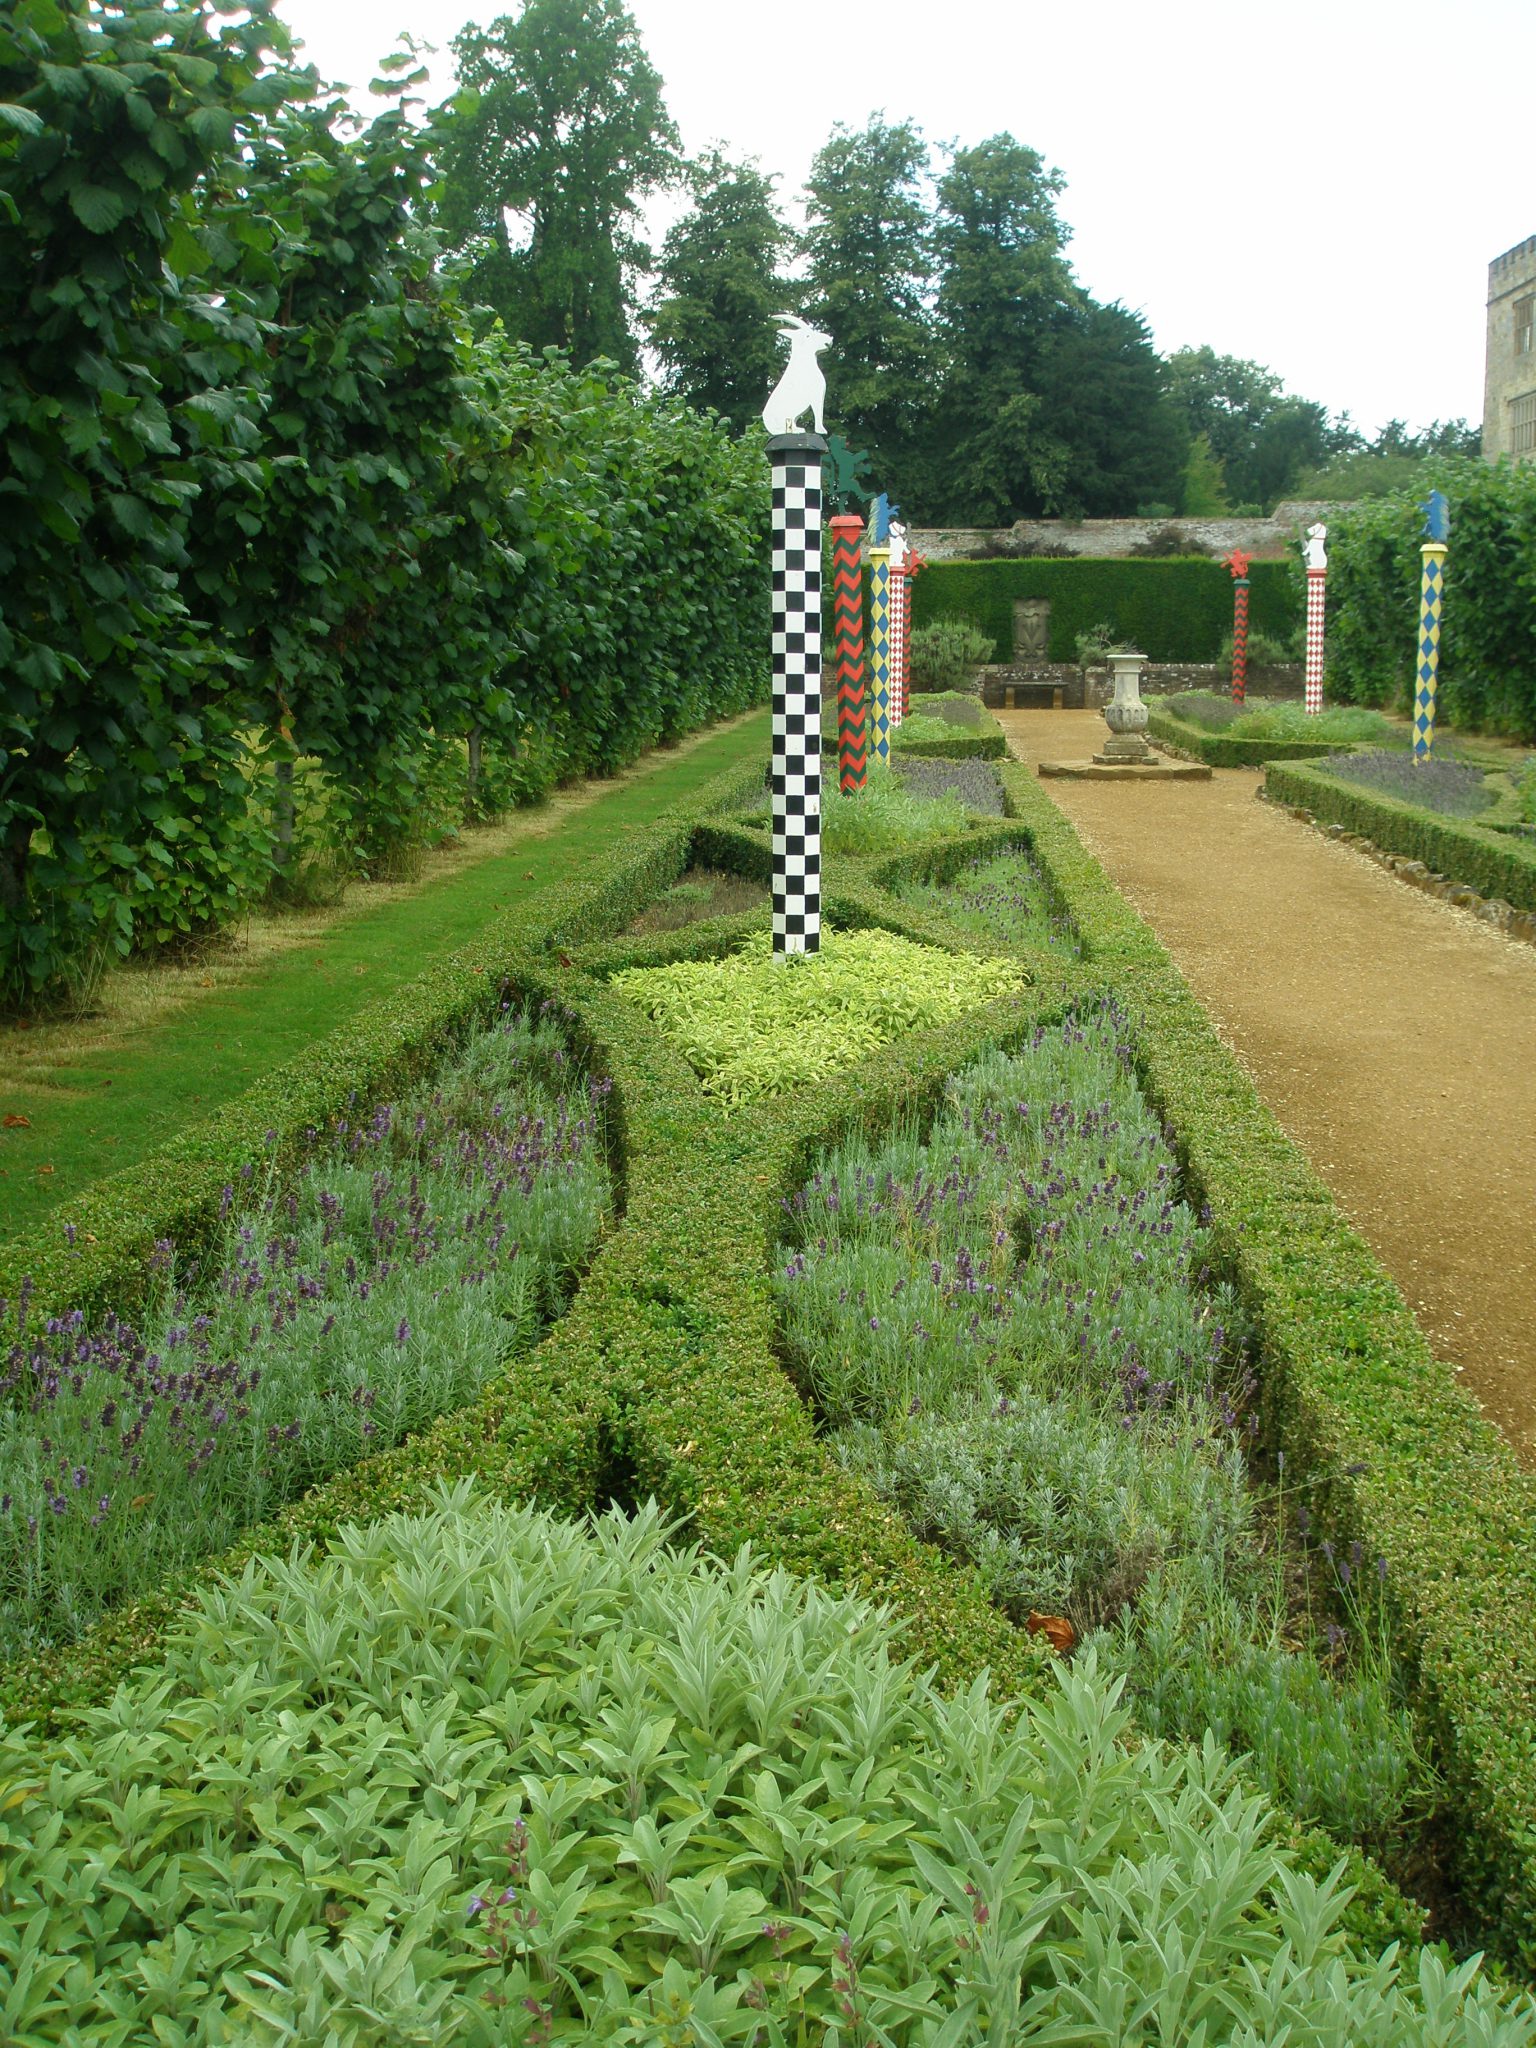 The Heraldic Garden abuts The Jubilee Walk. The Heraldic Garden's edge beds are partitioned by box hedges containing sage and lavender. The painted poles, always the focus of heraldic gardens, are topped with various beasts...all symbols of the Sidney family.